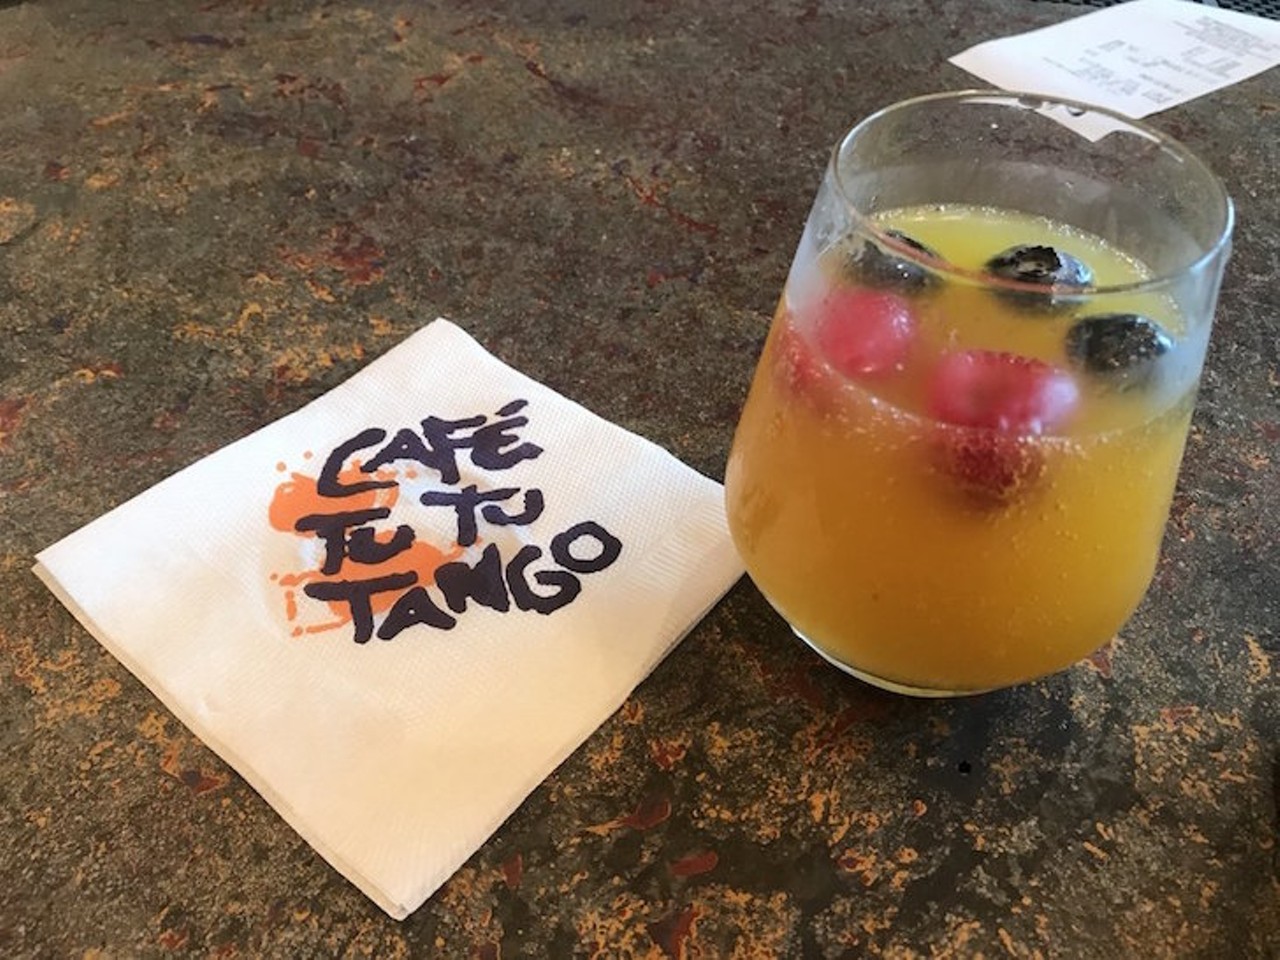 Cafe Tu Tu Tango  
8625 International Drive, 407-248-2222
Live entertainment and vibrant art pair well with bottomless bloody marys and mimosas. Served Saturdays starting at 11 a.m. and Sunday starting at 10 a.m., the bottomless bar costs $16.
Photo via Yelp/Lani G.